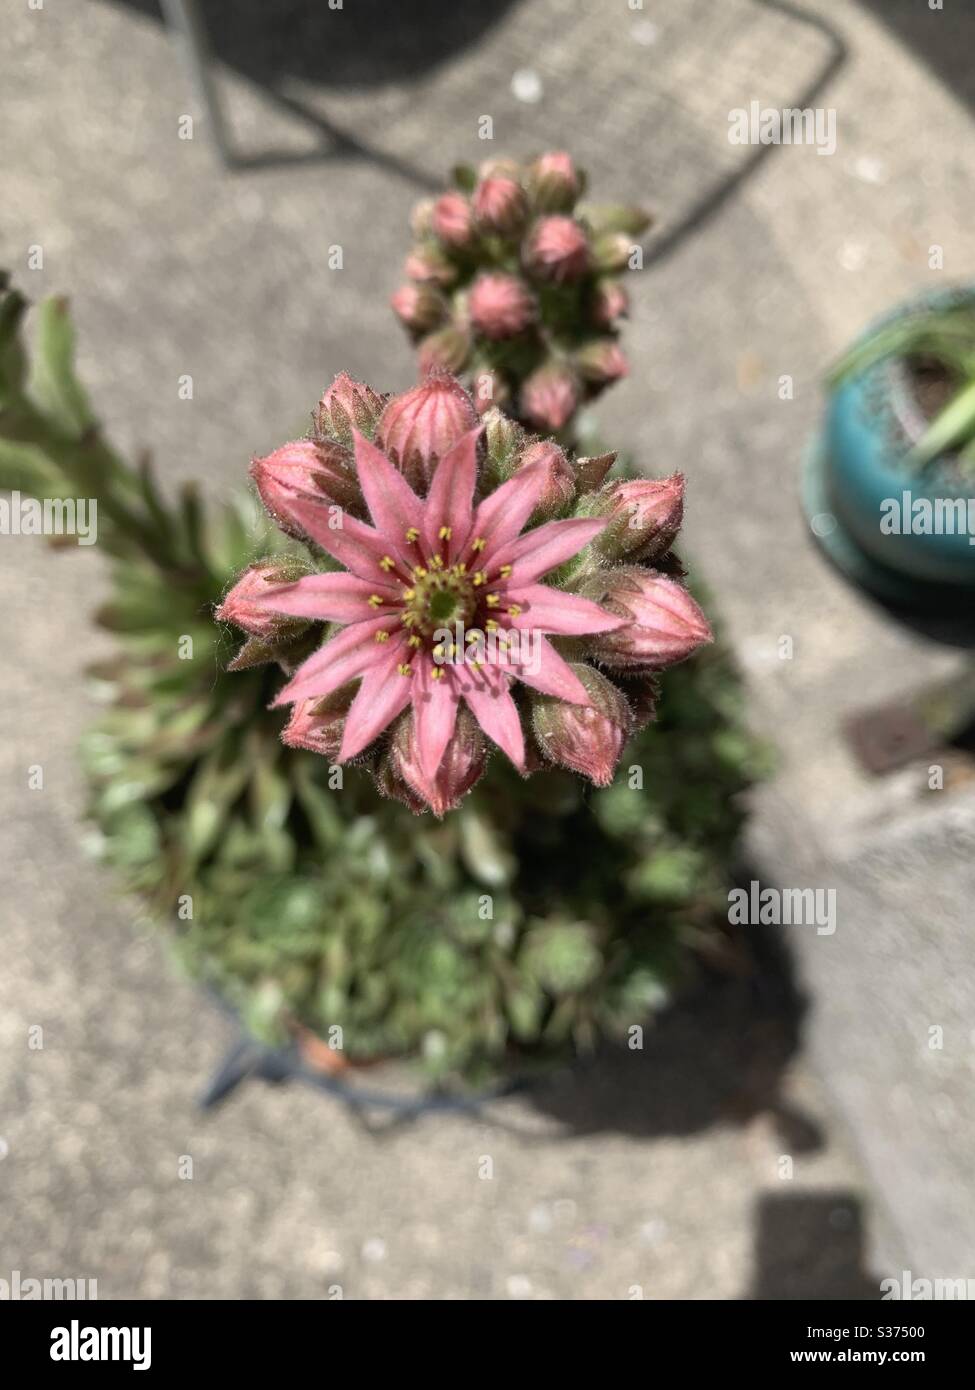 Hens and chick succulent plants blooming with pink flowers on rooster shoots. Gorgeous! Stock Photo